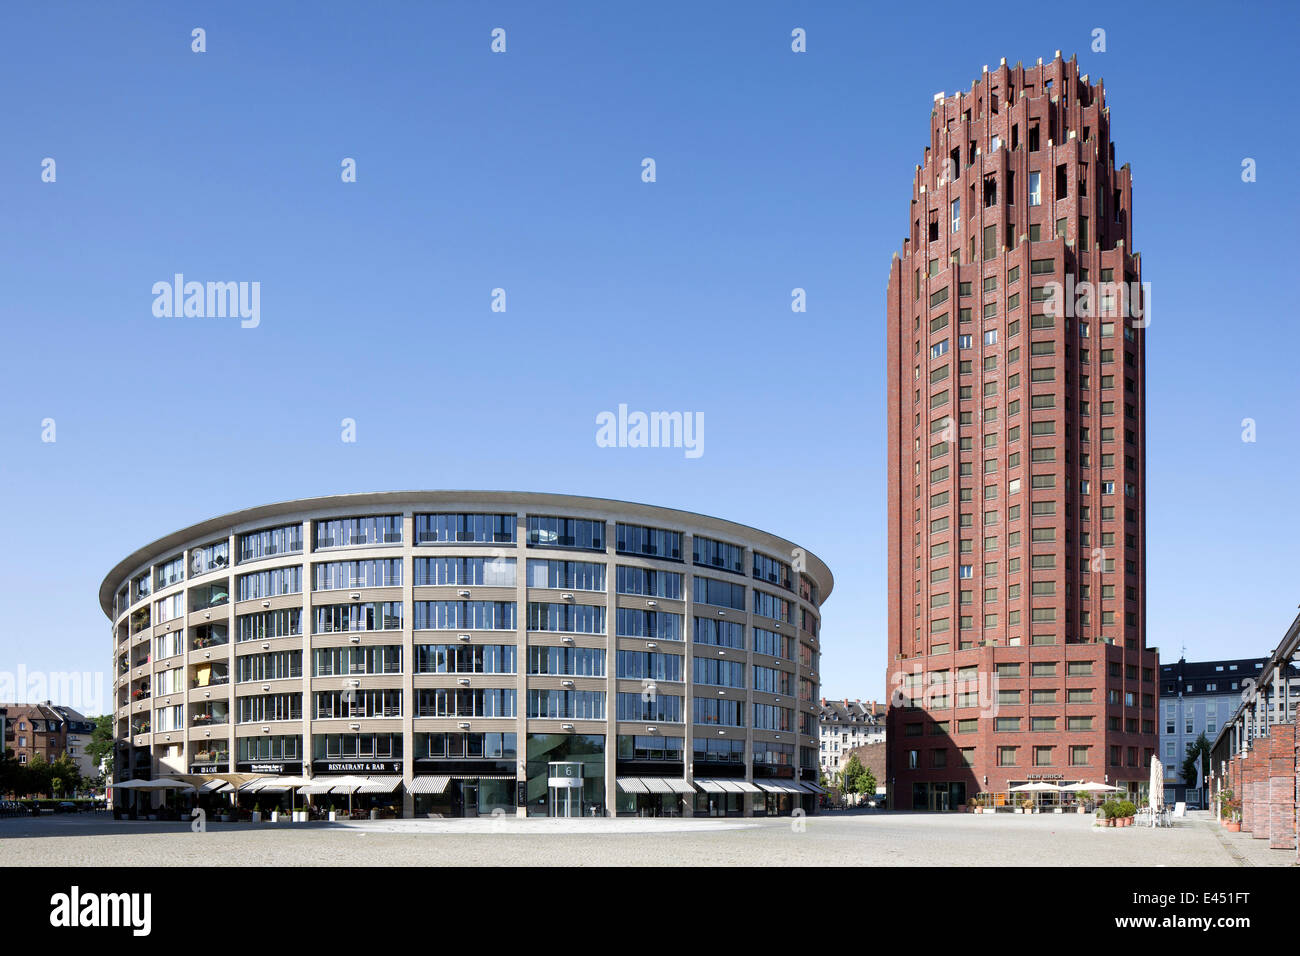 Main Plaza, hotel and residential building in the style of old American skyscrapers, architect Hans Kollhoff, Frankfurt am Main Stock Photo